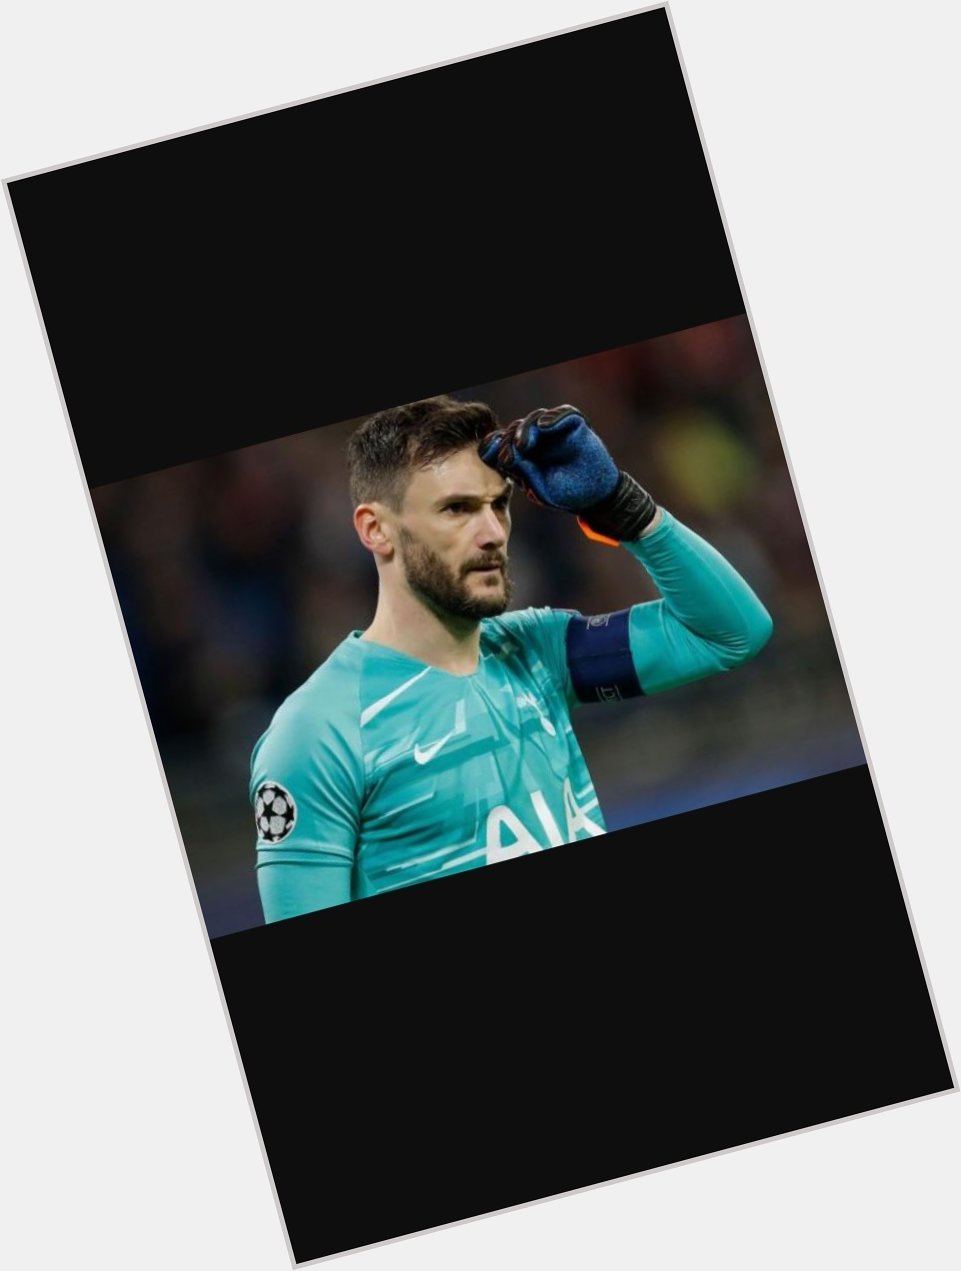 Mr Hugo Lloris Happy birthday to you once again I wish you long live and prosperity Jr# cares alot 